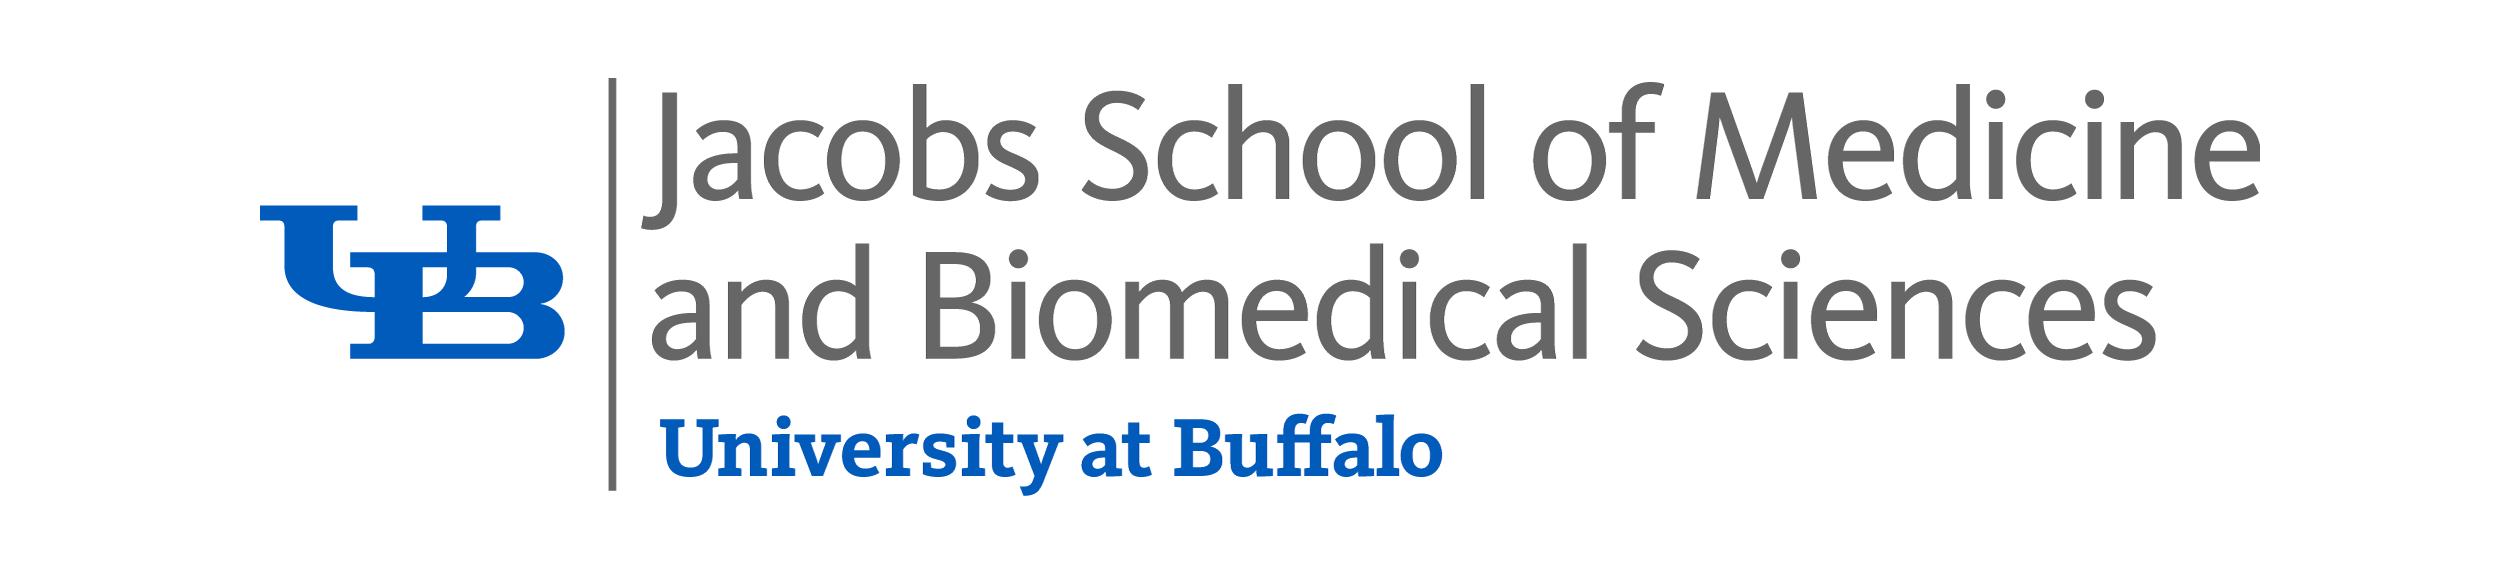 Marching Order Logo of Jacobs School of Medicine and Biomedical Sciences at  the University at Buffalo 2020 Virtual Biomedical Sciences Graduate and  Undergraduate Commencement Ceremony Honored Speaker Undergraduate Awards  and Degree ...